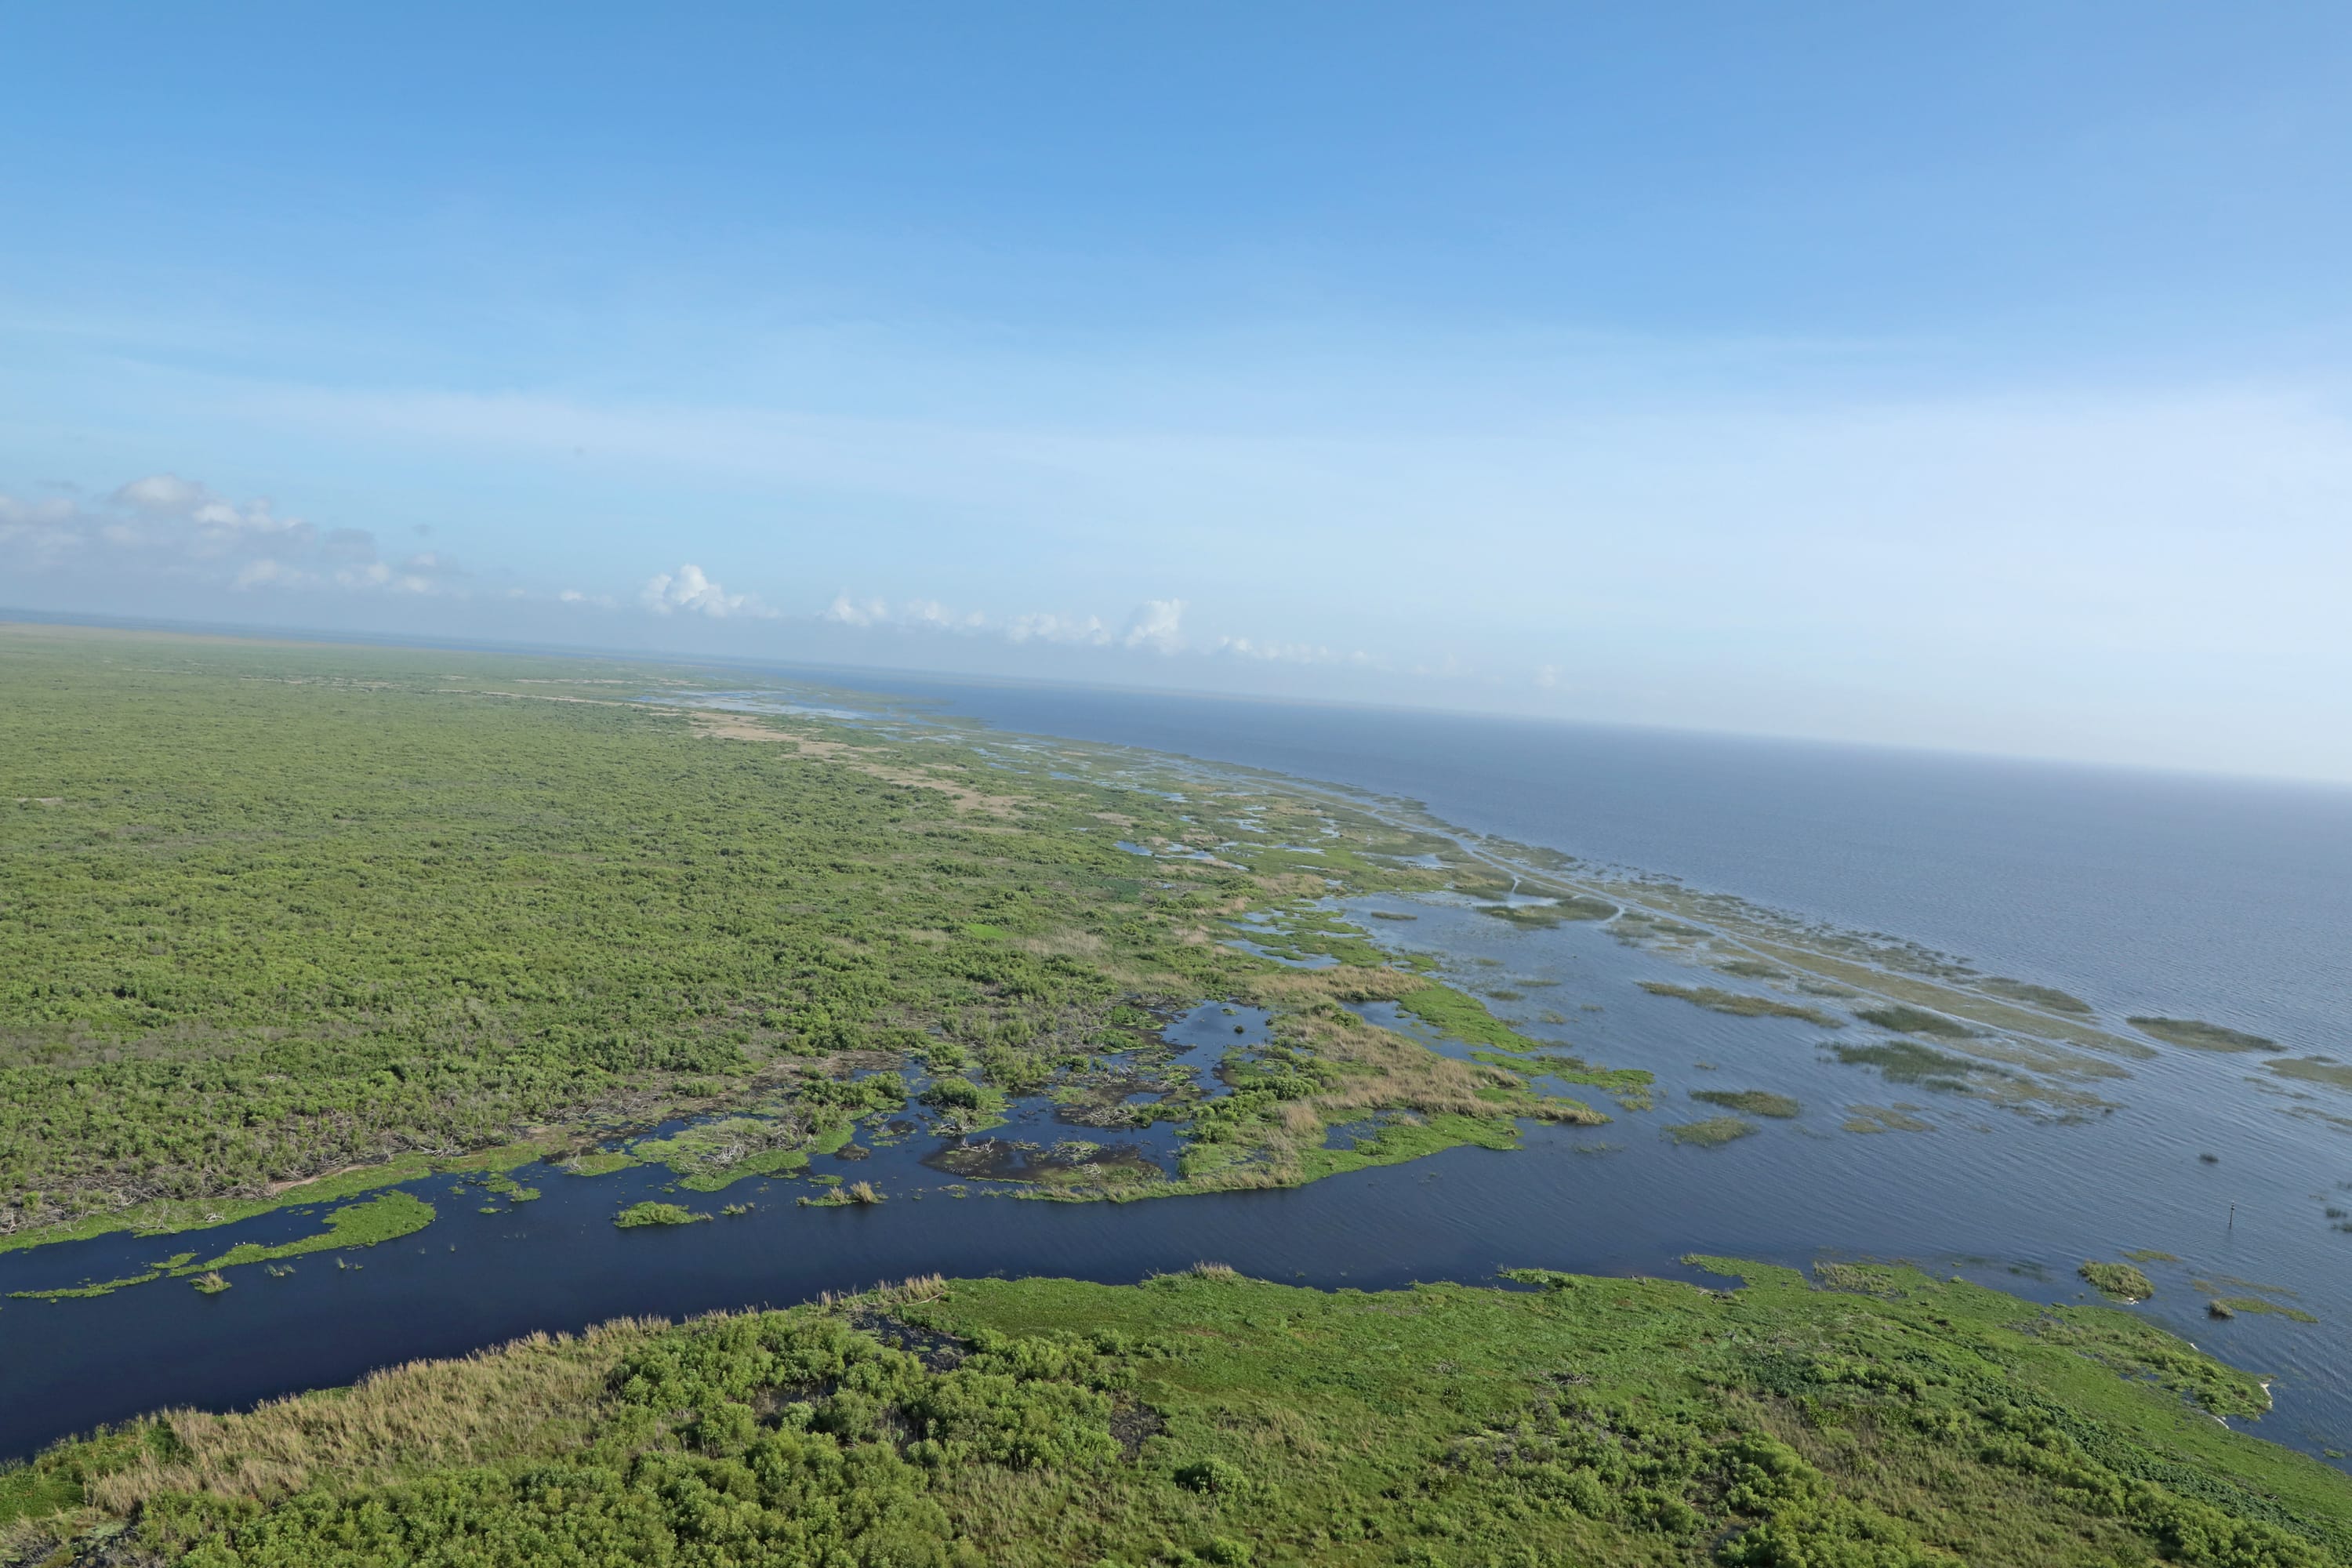 Photo Credit: Charles Hanlon, South Florida Water Management District Edge of the littoral zone at Cochrans Pass (April 2021).